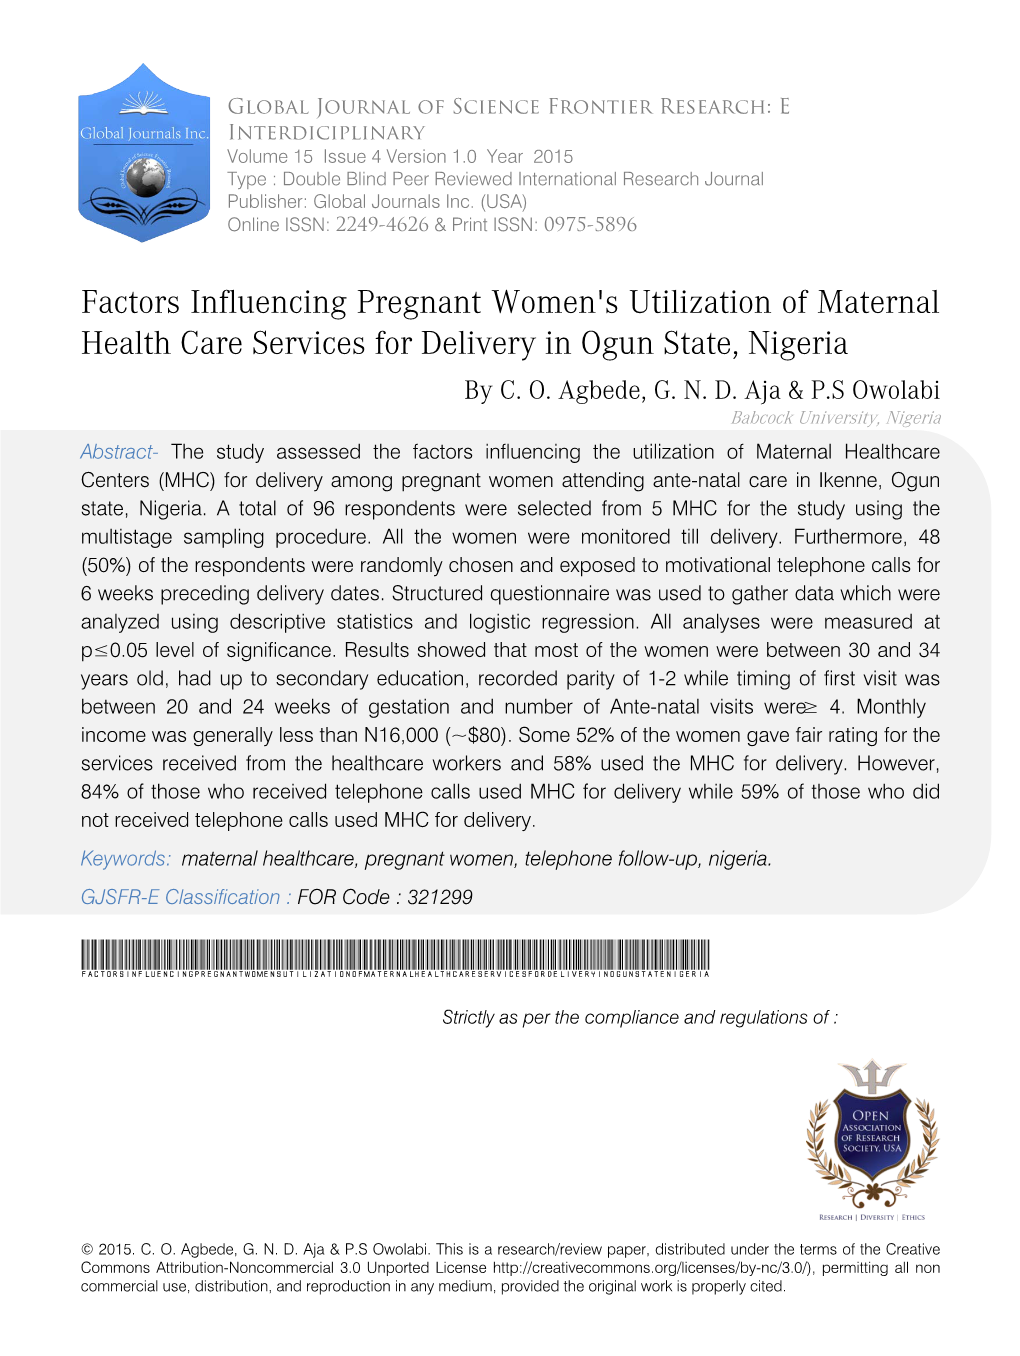 Factors Influencing Pregnant Women's Utilization of Maternal Health Care Services for Delivery in Ogun State, Nigeria by C